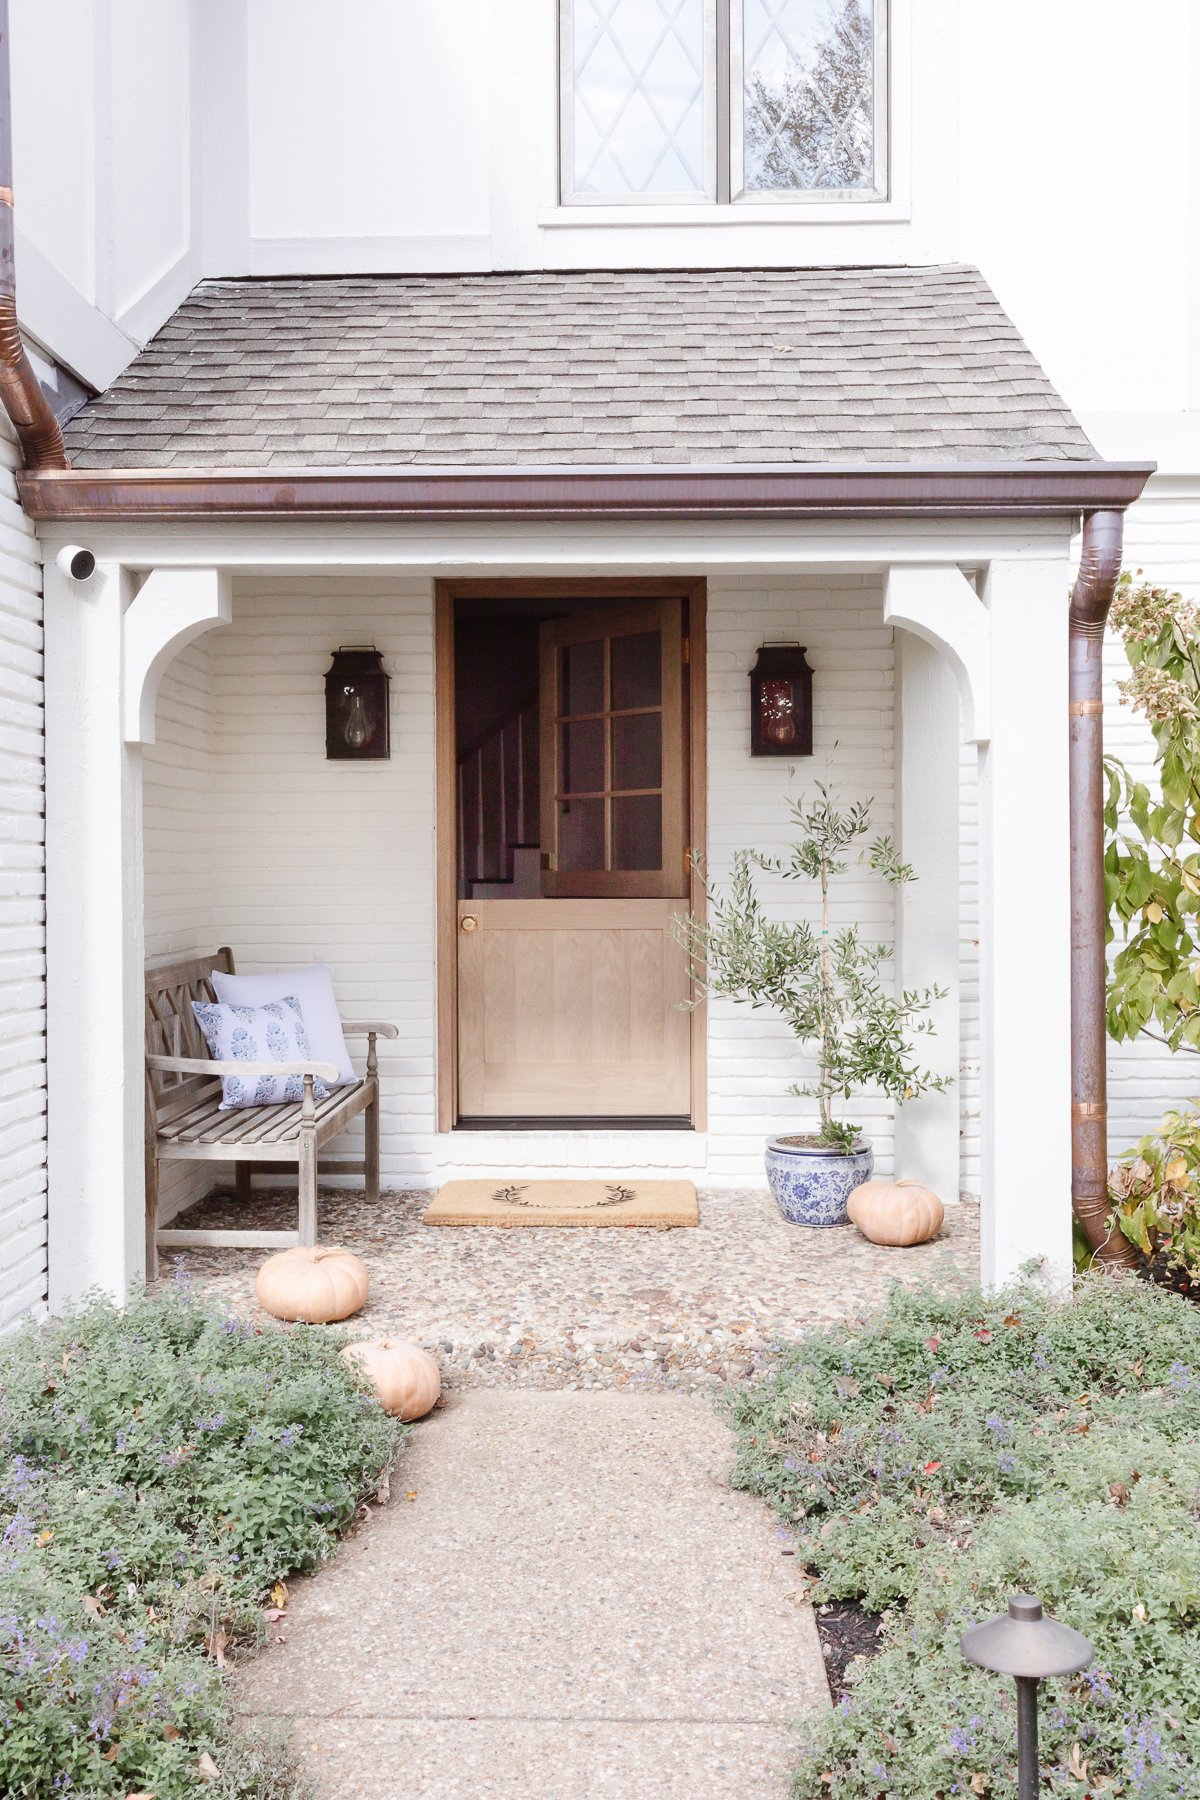 netural brick house with dutch door copper lanterns and porch decorated for fall